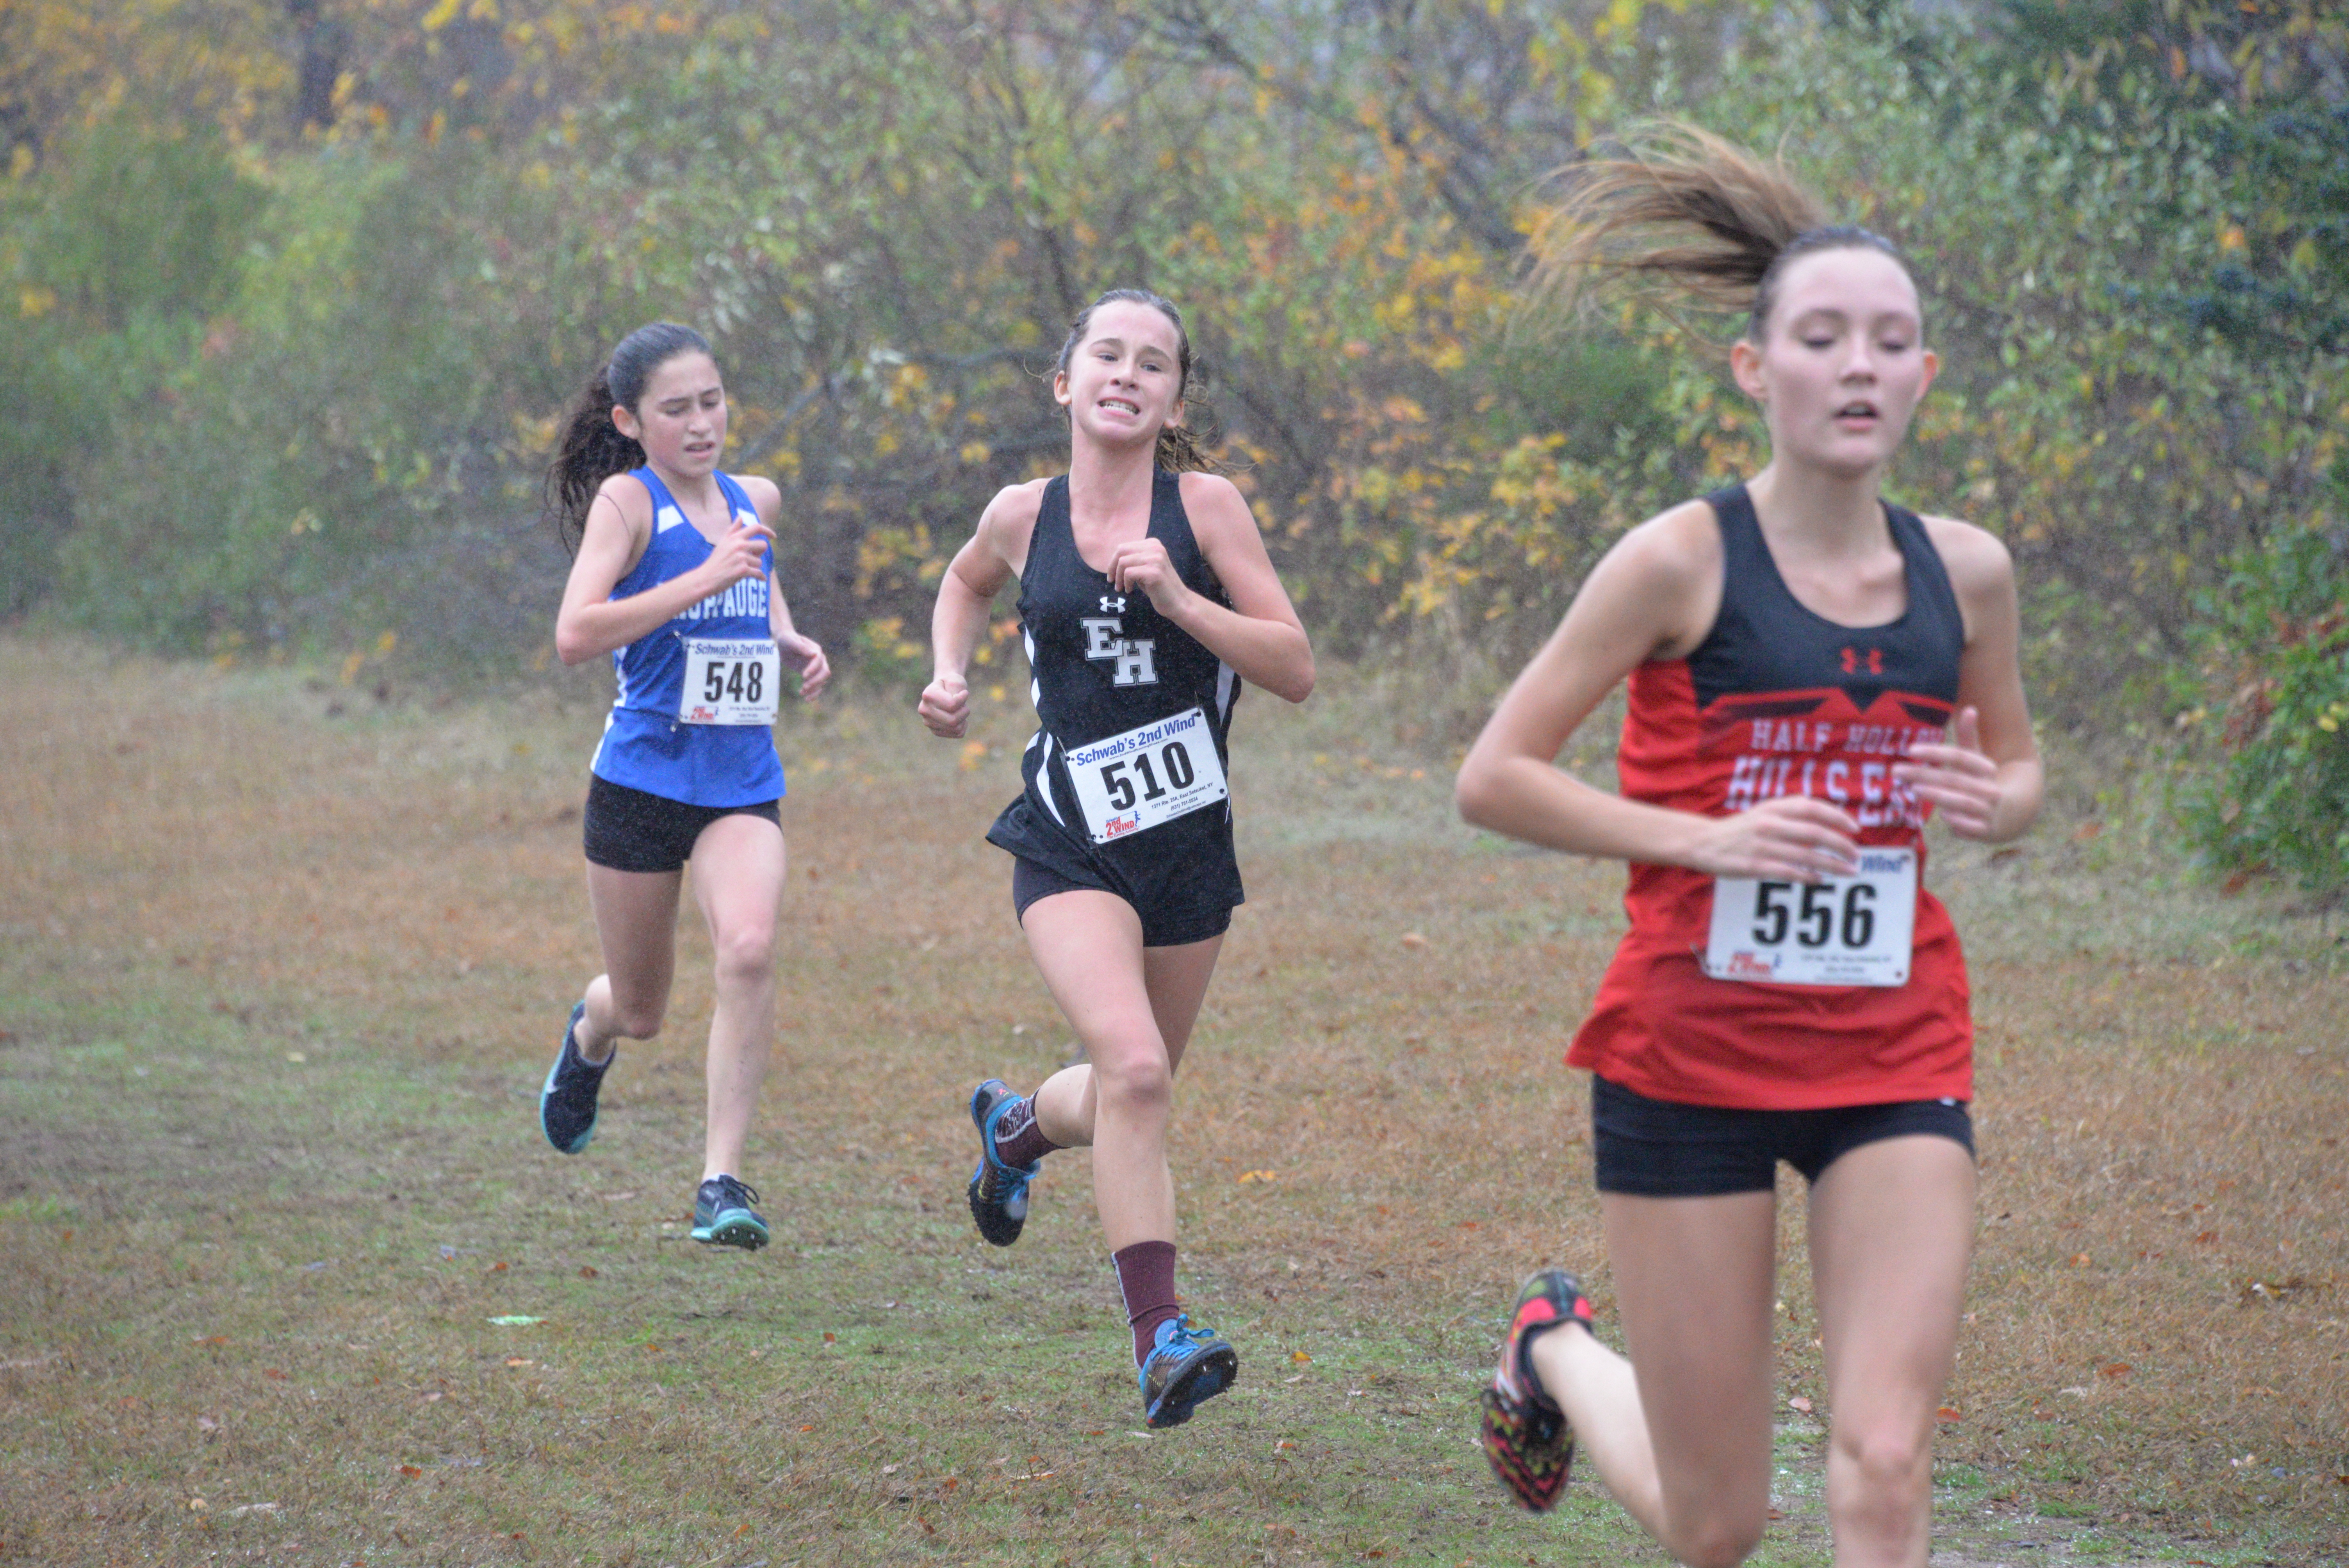 Eighth-grader Dylan Cashin came up big for the East Hampton girls cross country team at the division meet on October 29.